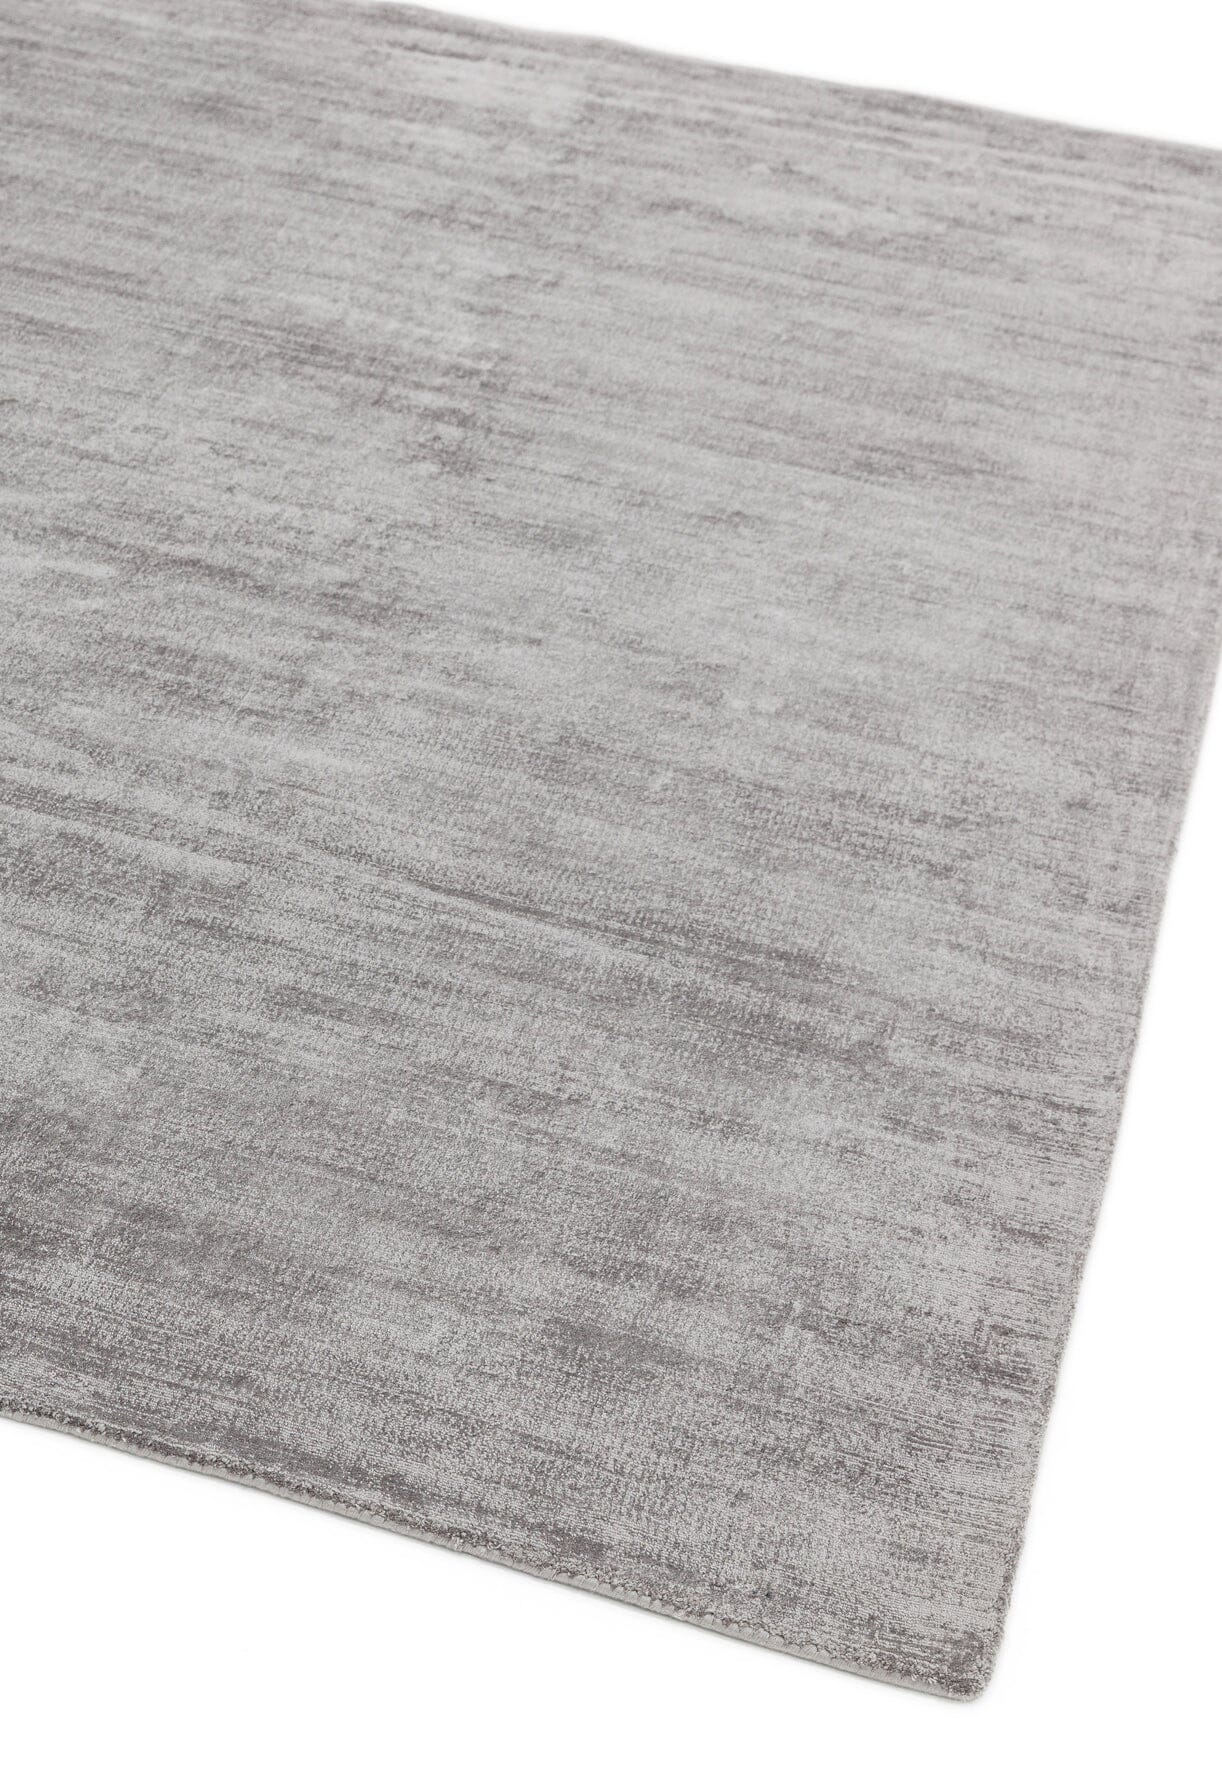  Asiatic Carpets-Asiatic Carpets Blade Hand Woven Rug Silver - 120 x 170cm-Grey, Silver 037 